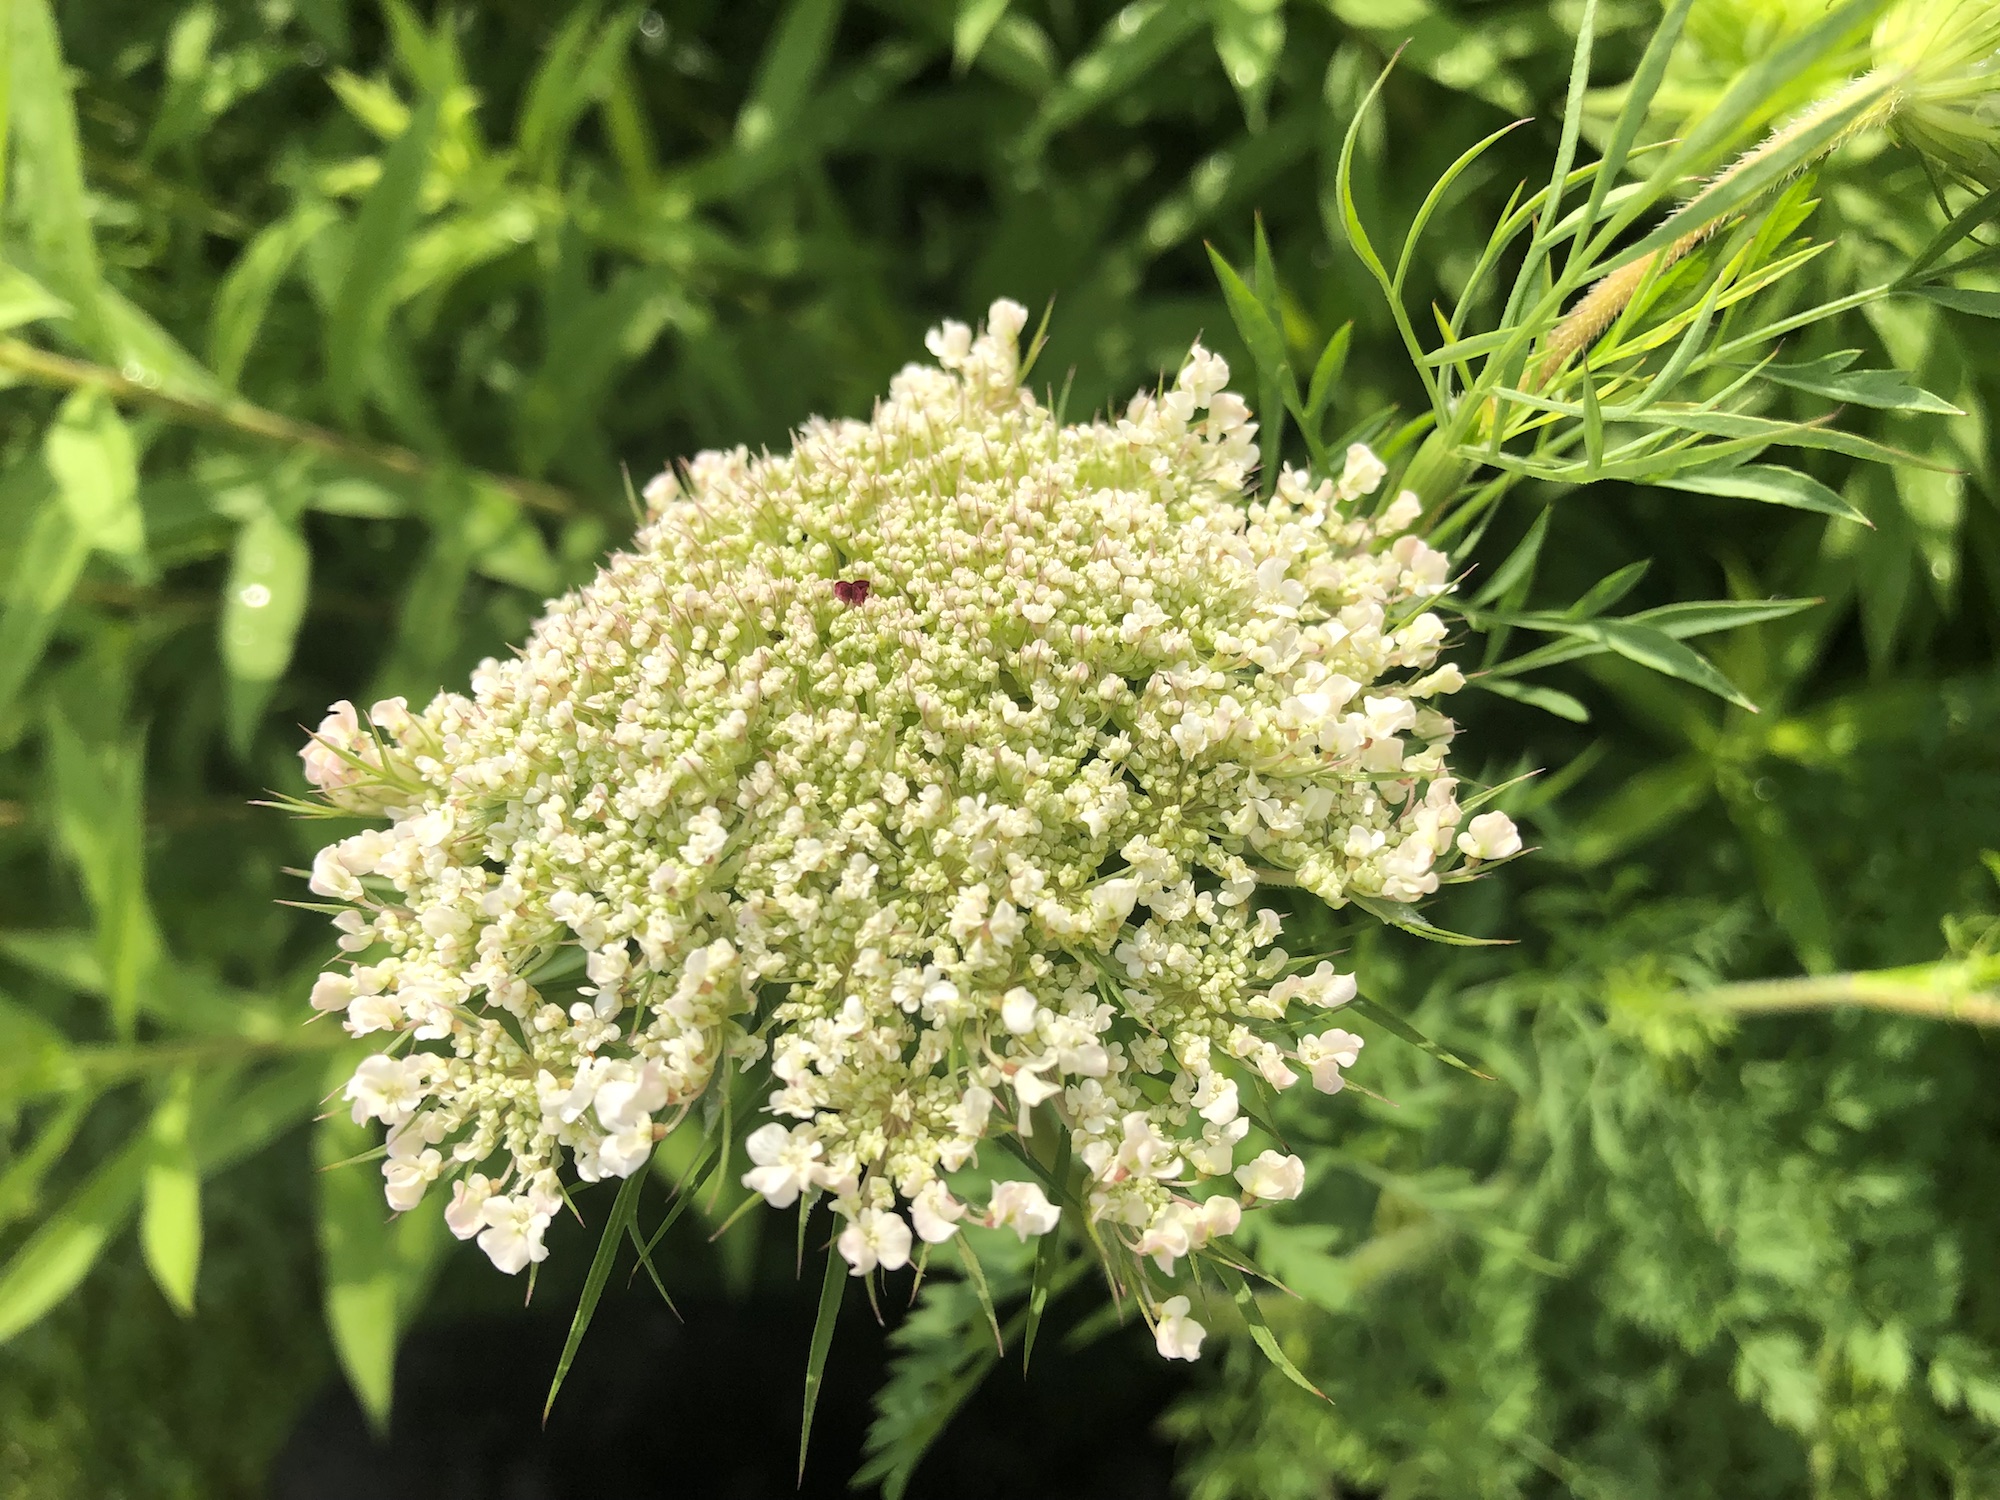 Queen Anne's Lace on bank of retaining pond on the corner of Nakoma Road and Manitou Way in Madison, WI on July 6, 2019.